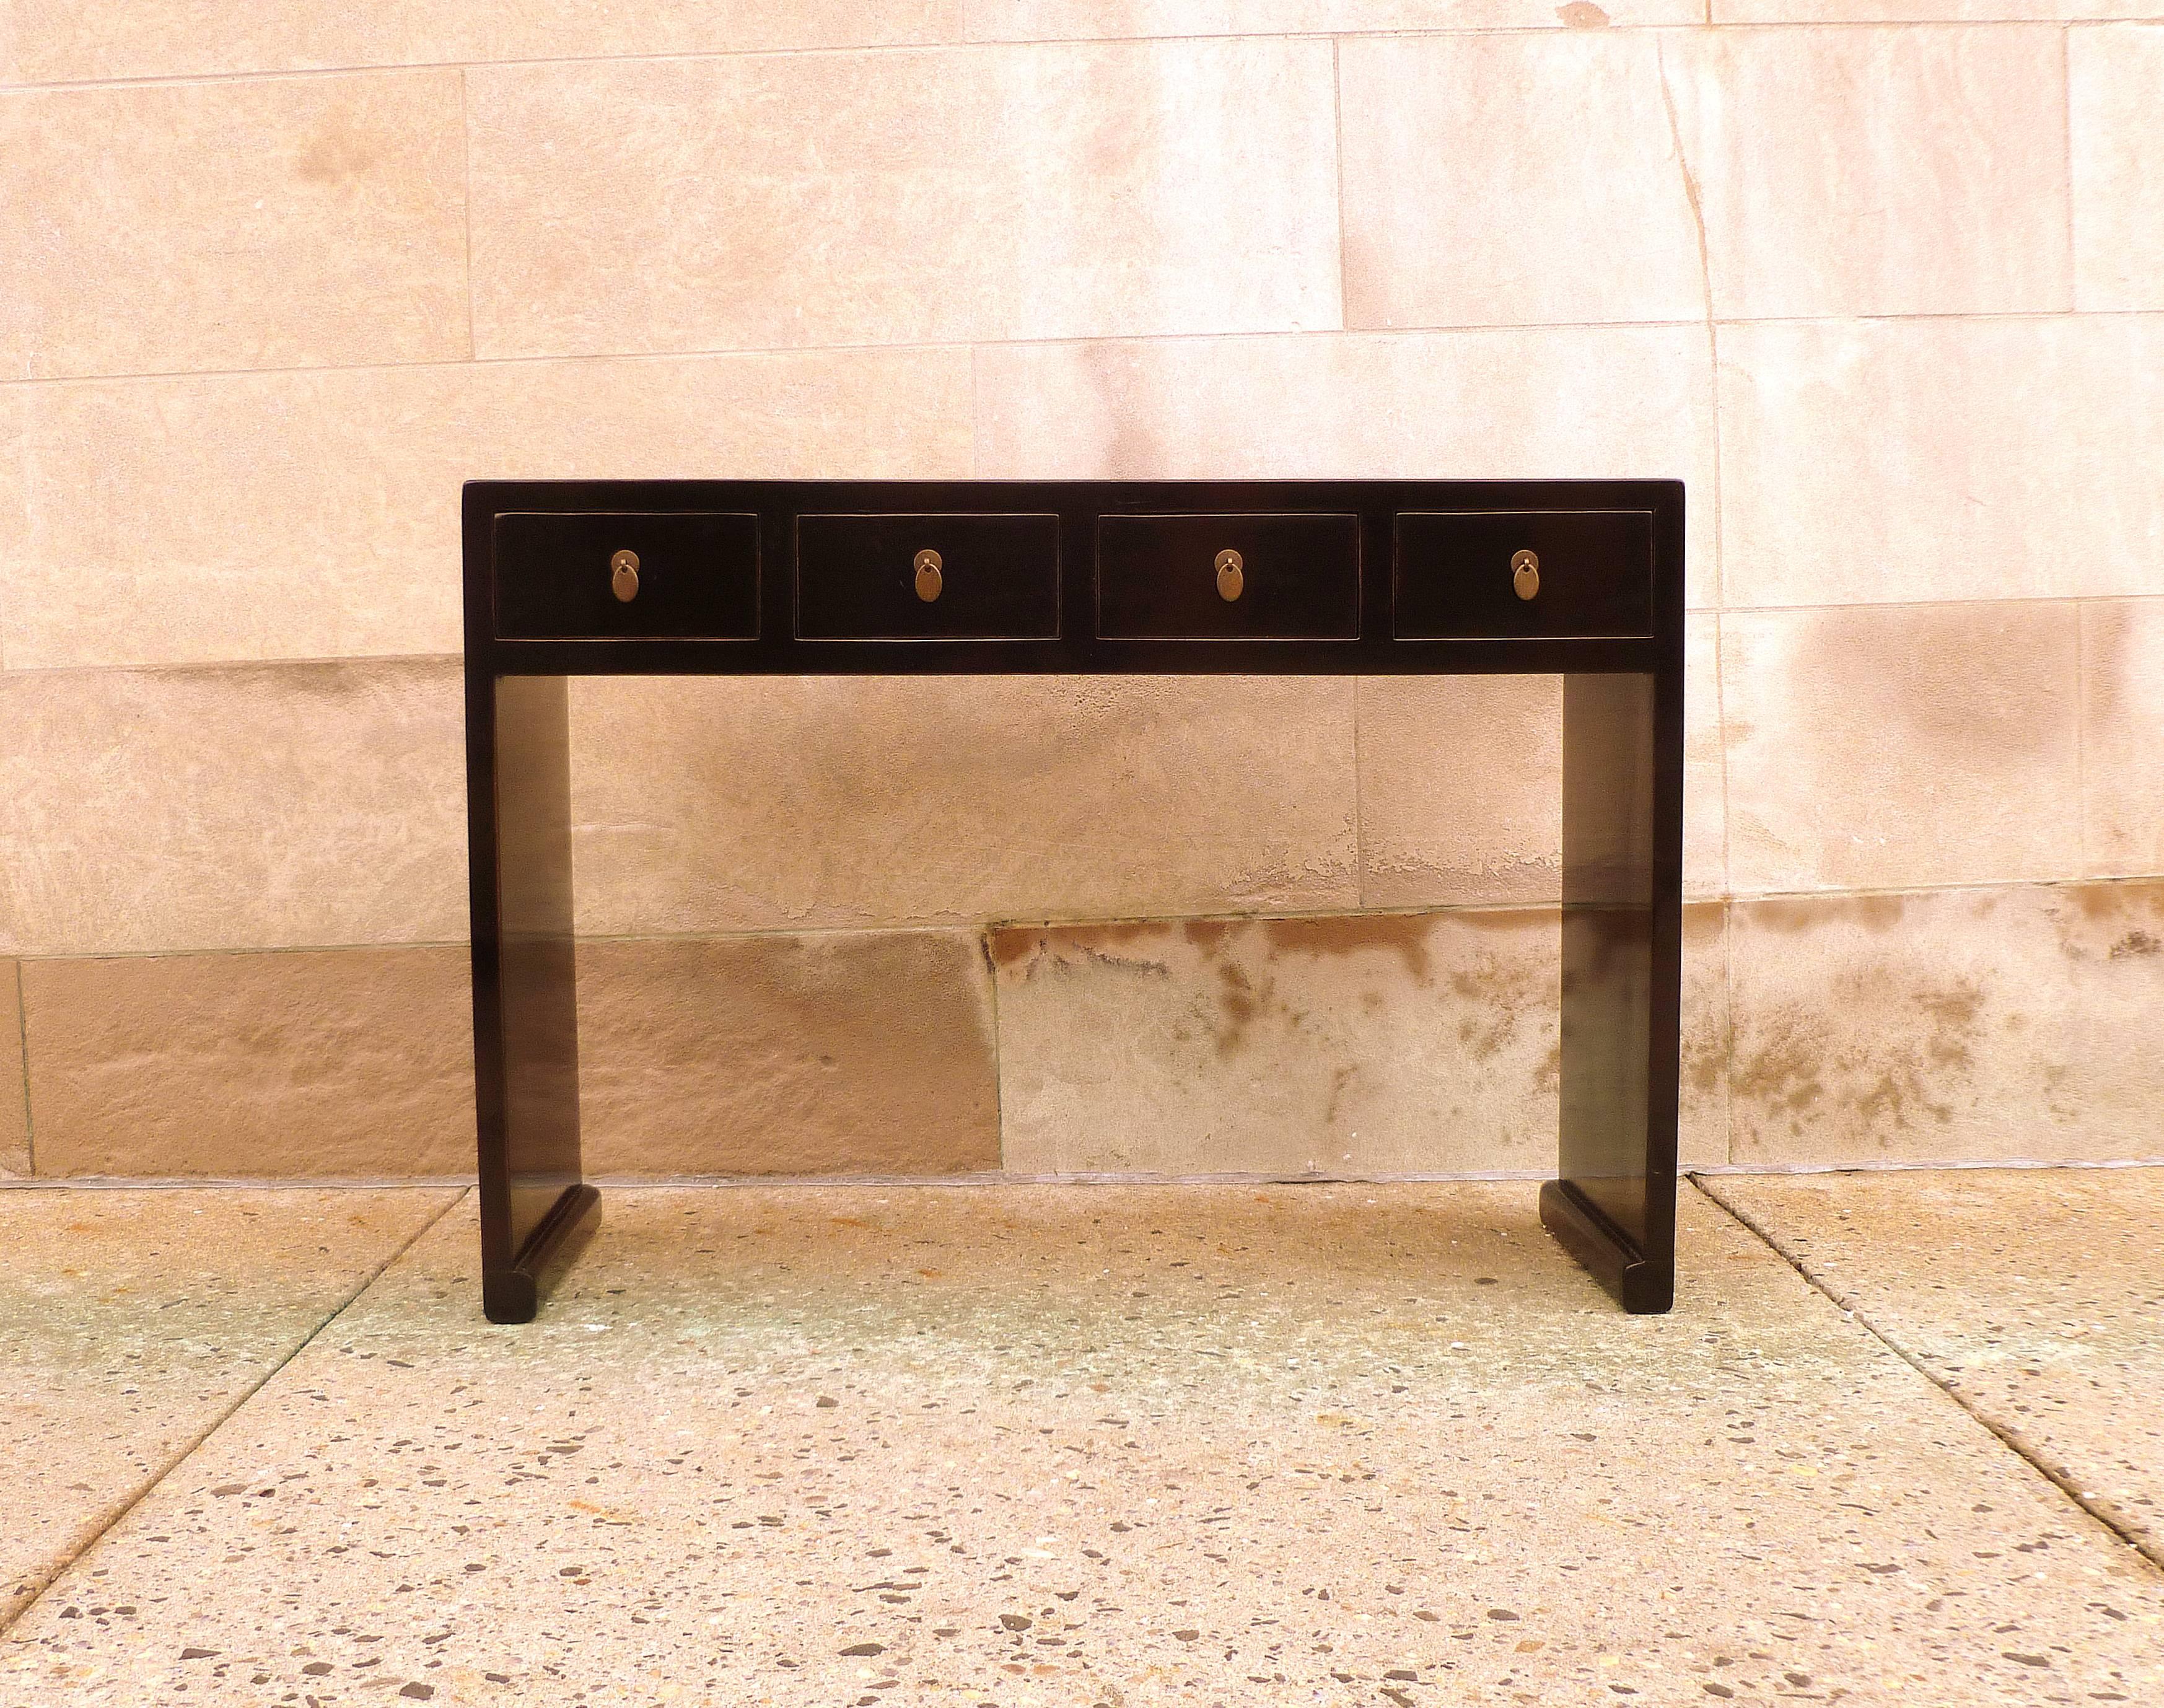 Fine black lacquer console table with drawers and waterfall legs. Very elegant and beautiful form and color.